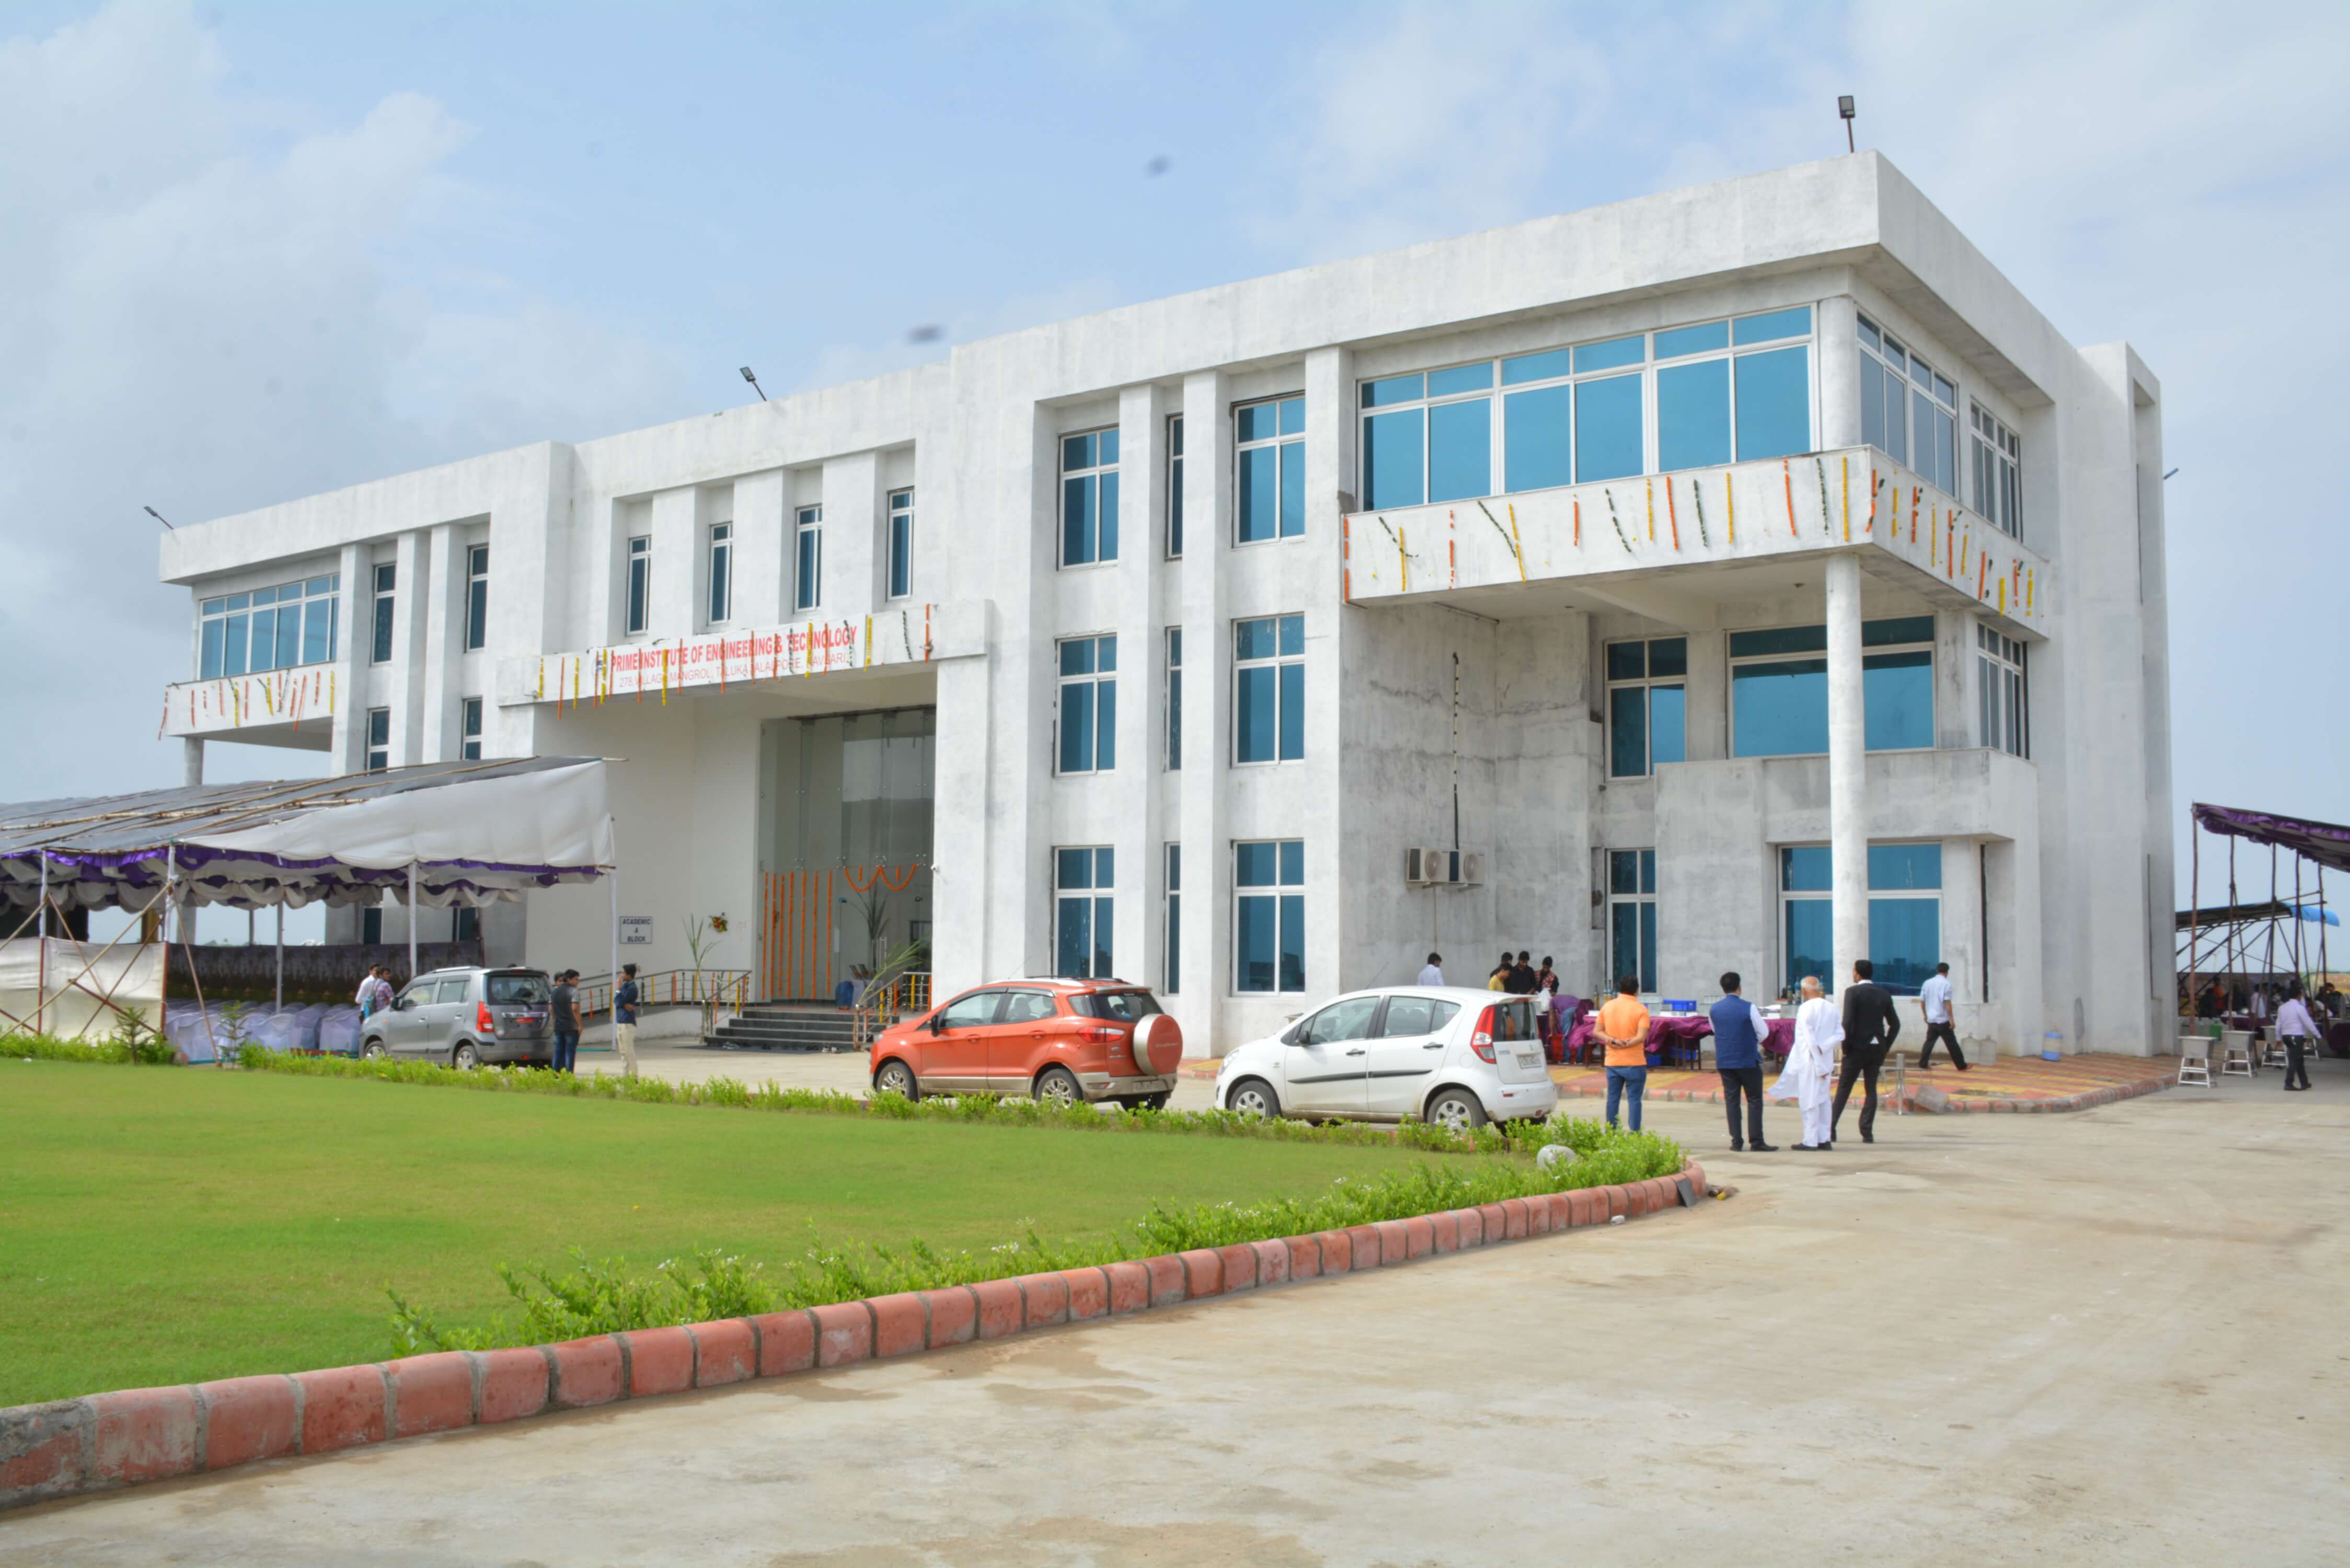 PRIME INSTITUTE OF TECHNOLOGY